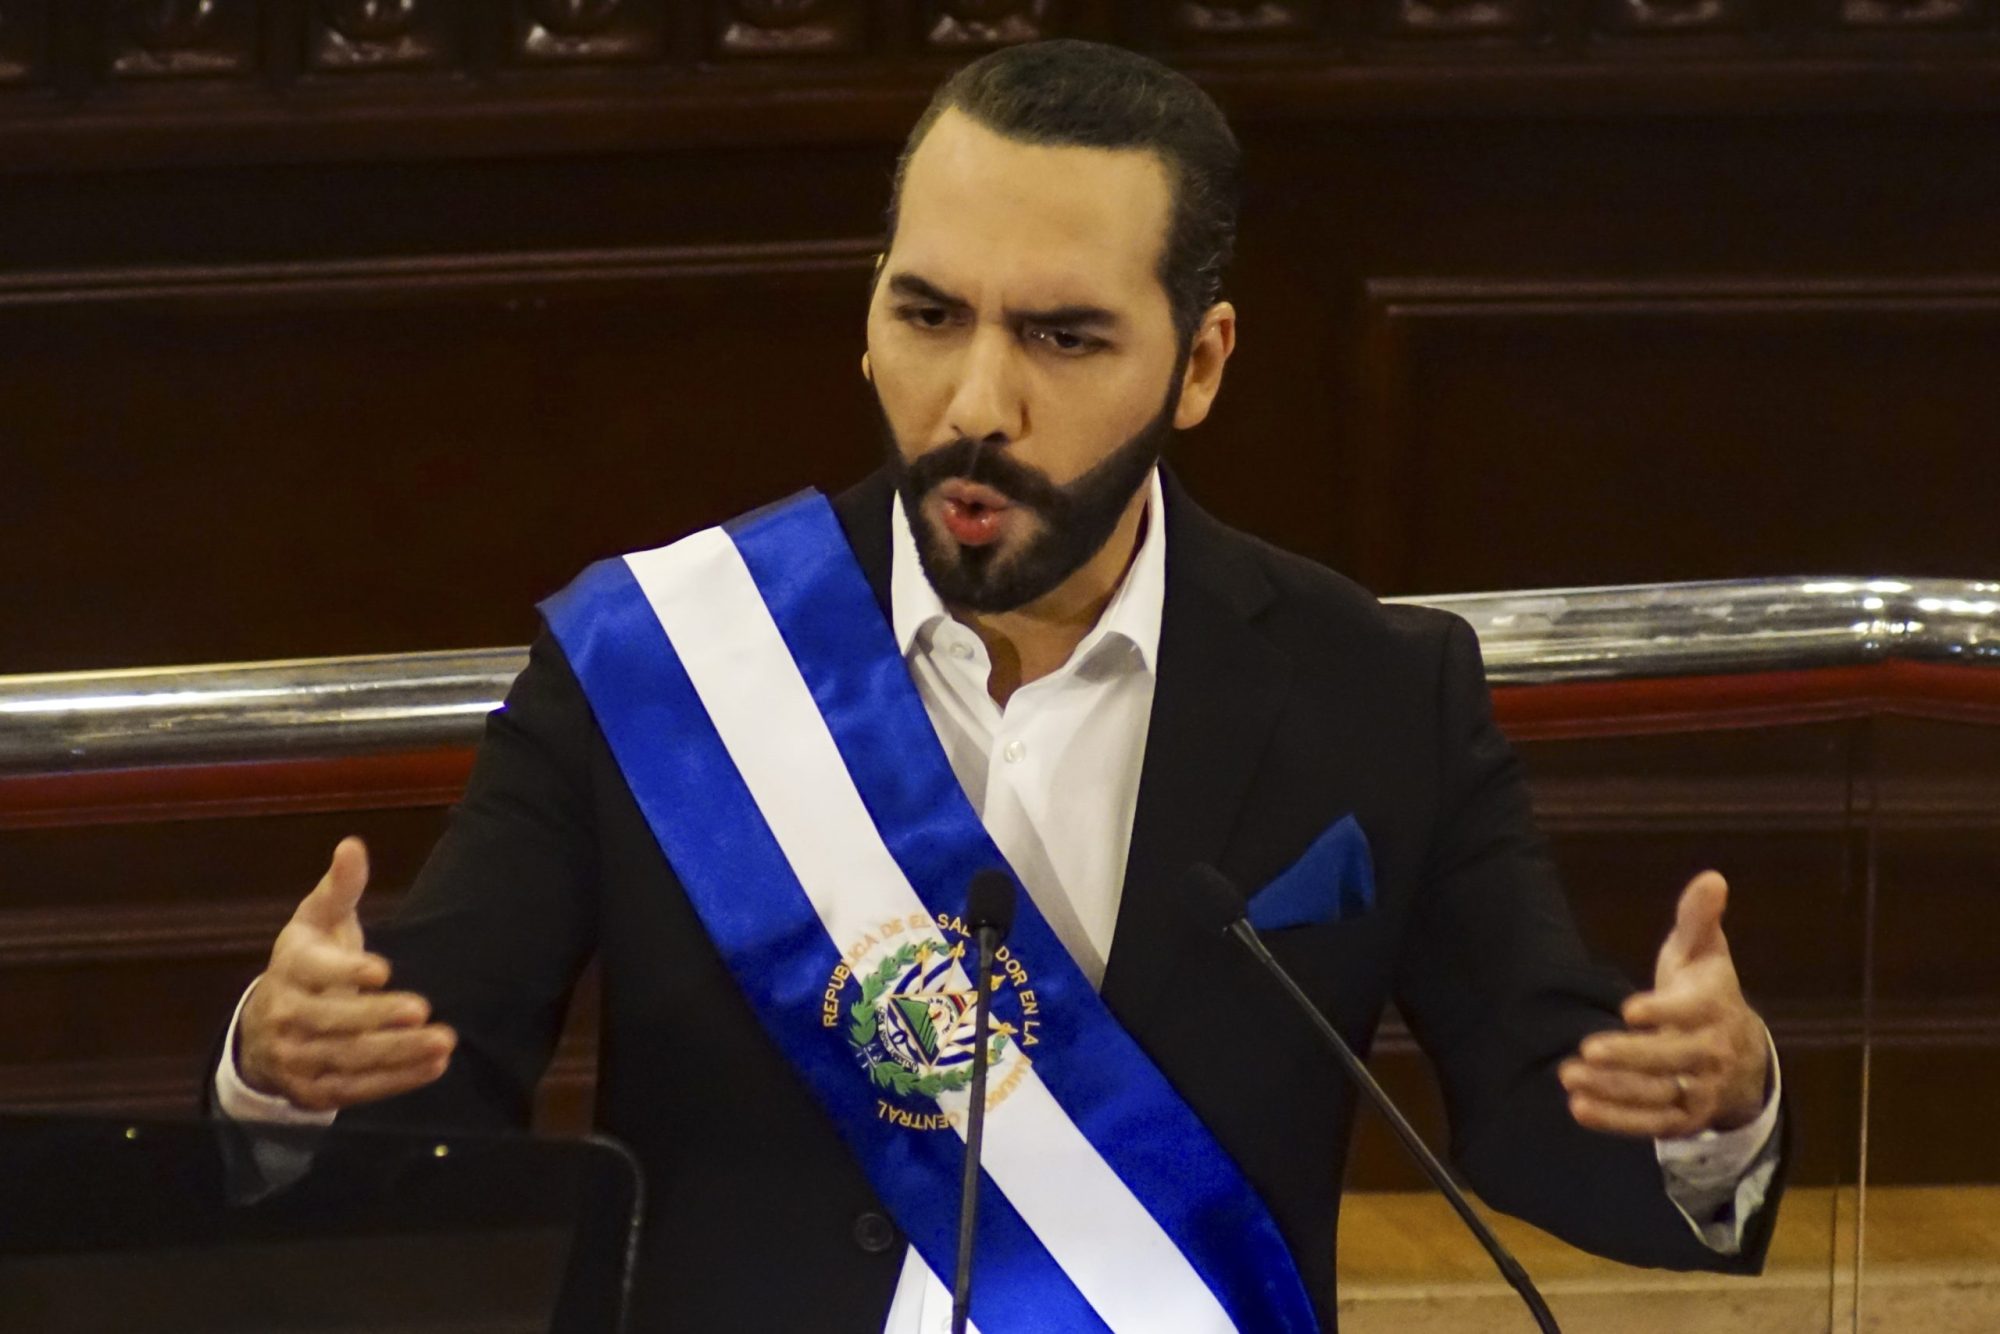 Salvadoran President Nayib Bukele gestures during a speech for his second anniversary in power on June 1, 2021 in San Salvador, El Salvador. Photo by Emerson Flores/APHOTOGRAFIA/Getty Images